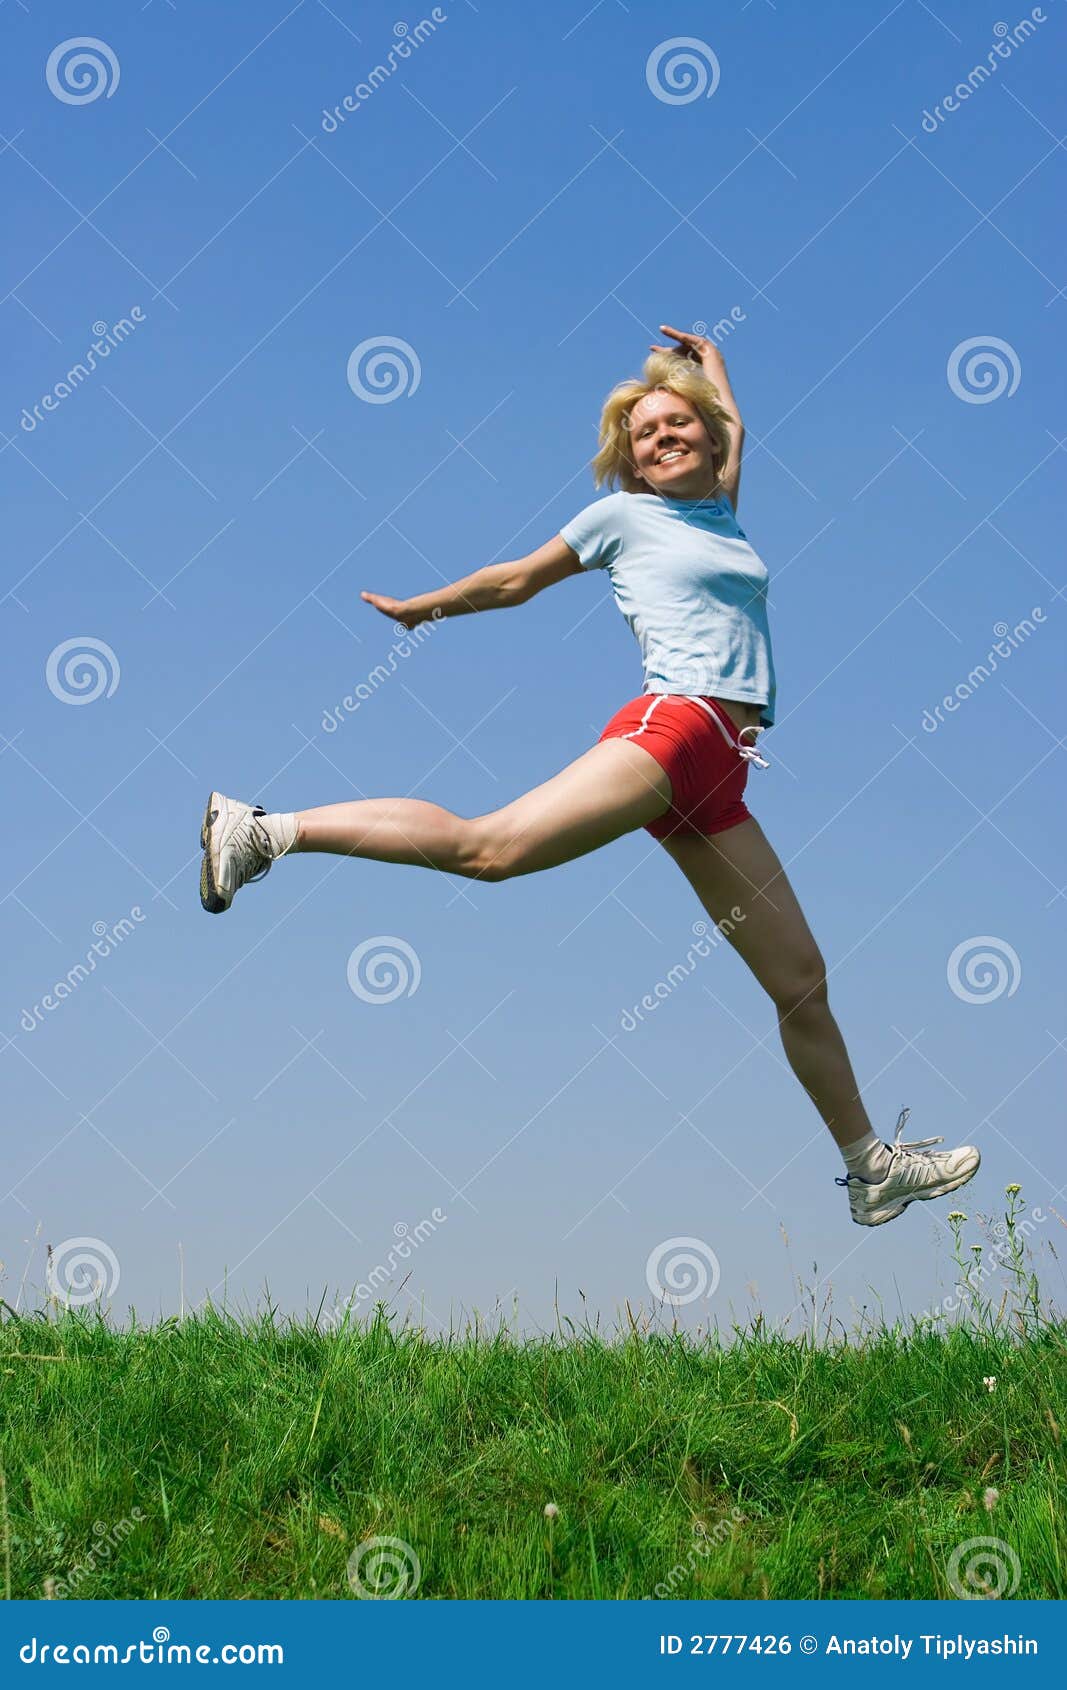 https://thumbs.dreamstime.com/z/happy-young-woman-jumping-2777426.jpg